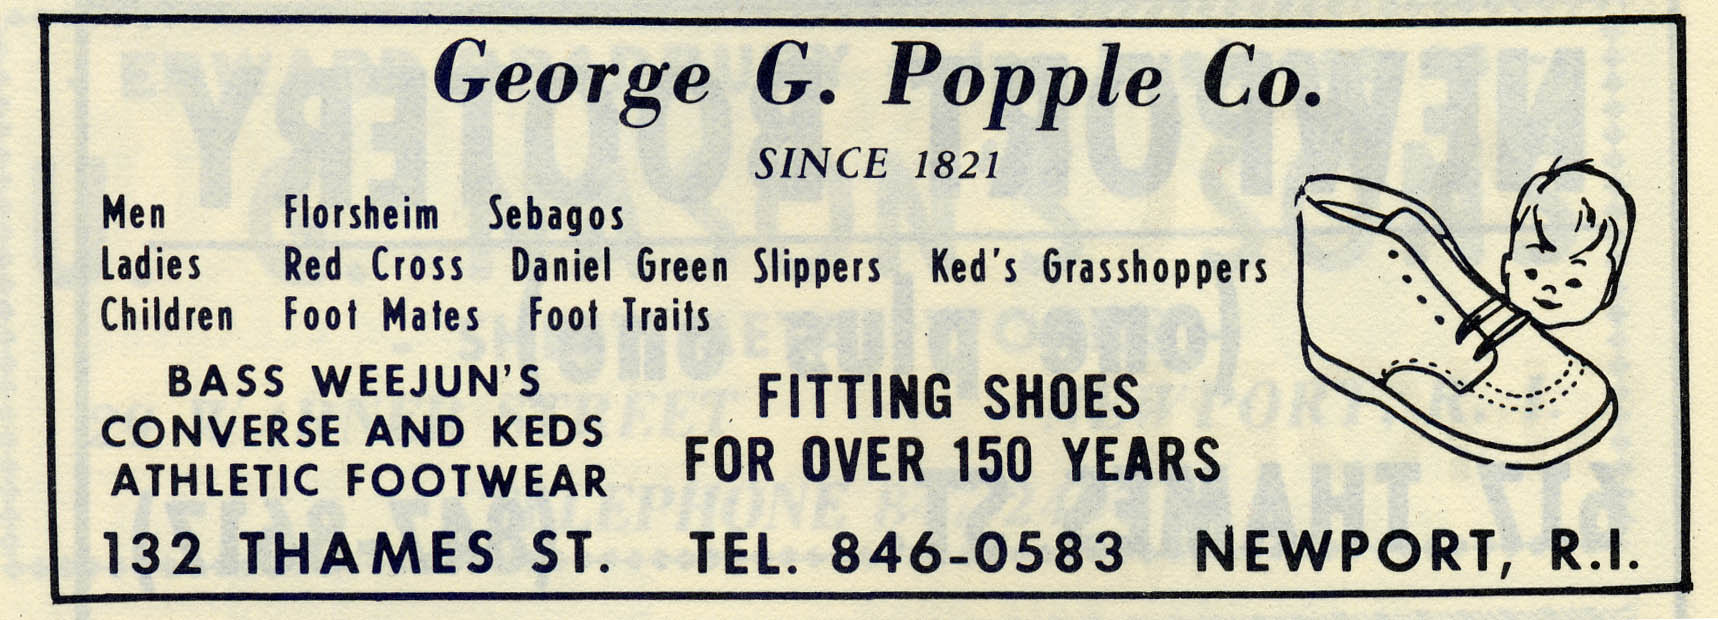 Ad ad for Popple shoes from the 1978 City Directory. 